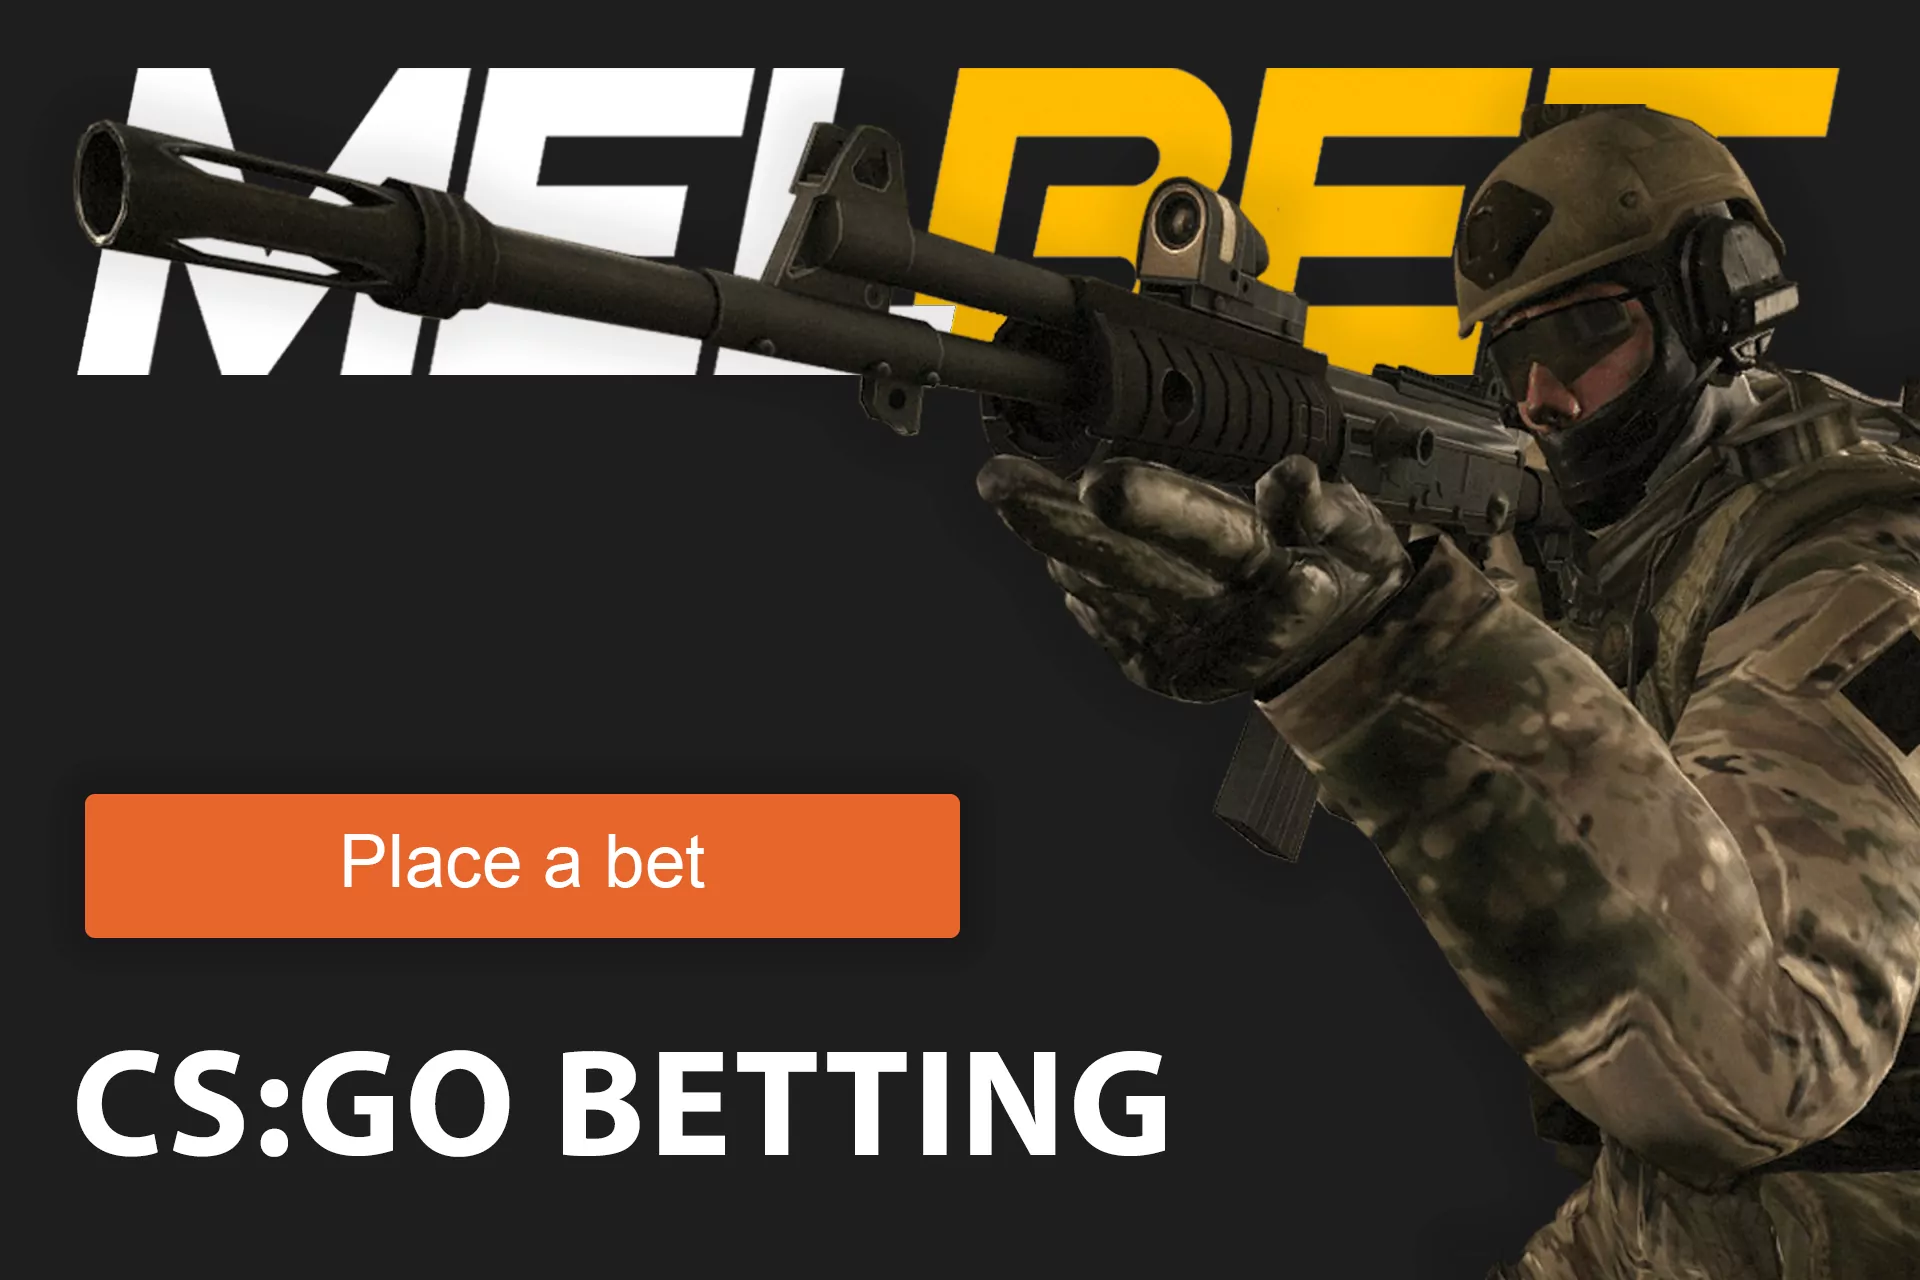 CS:GO events are always available for betting at Melbet Bangladesh.